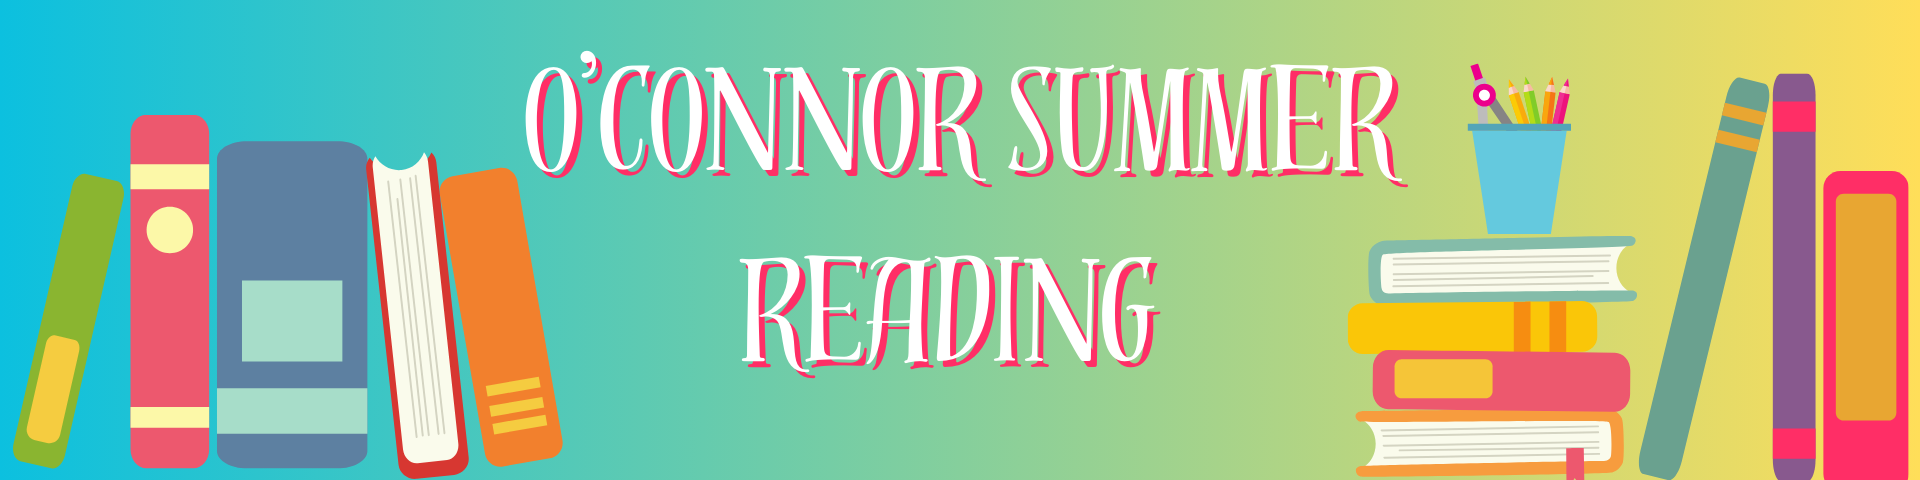 O'Connor Summer Reading with pictures of books 